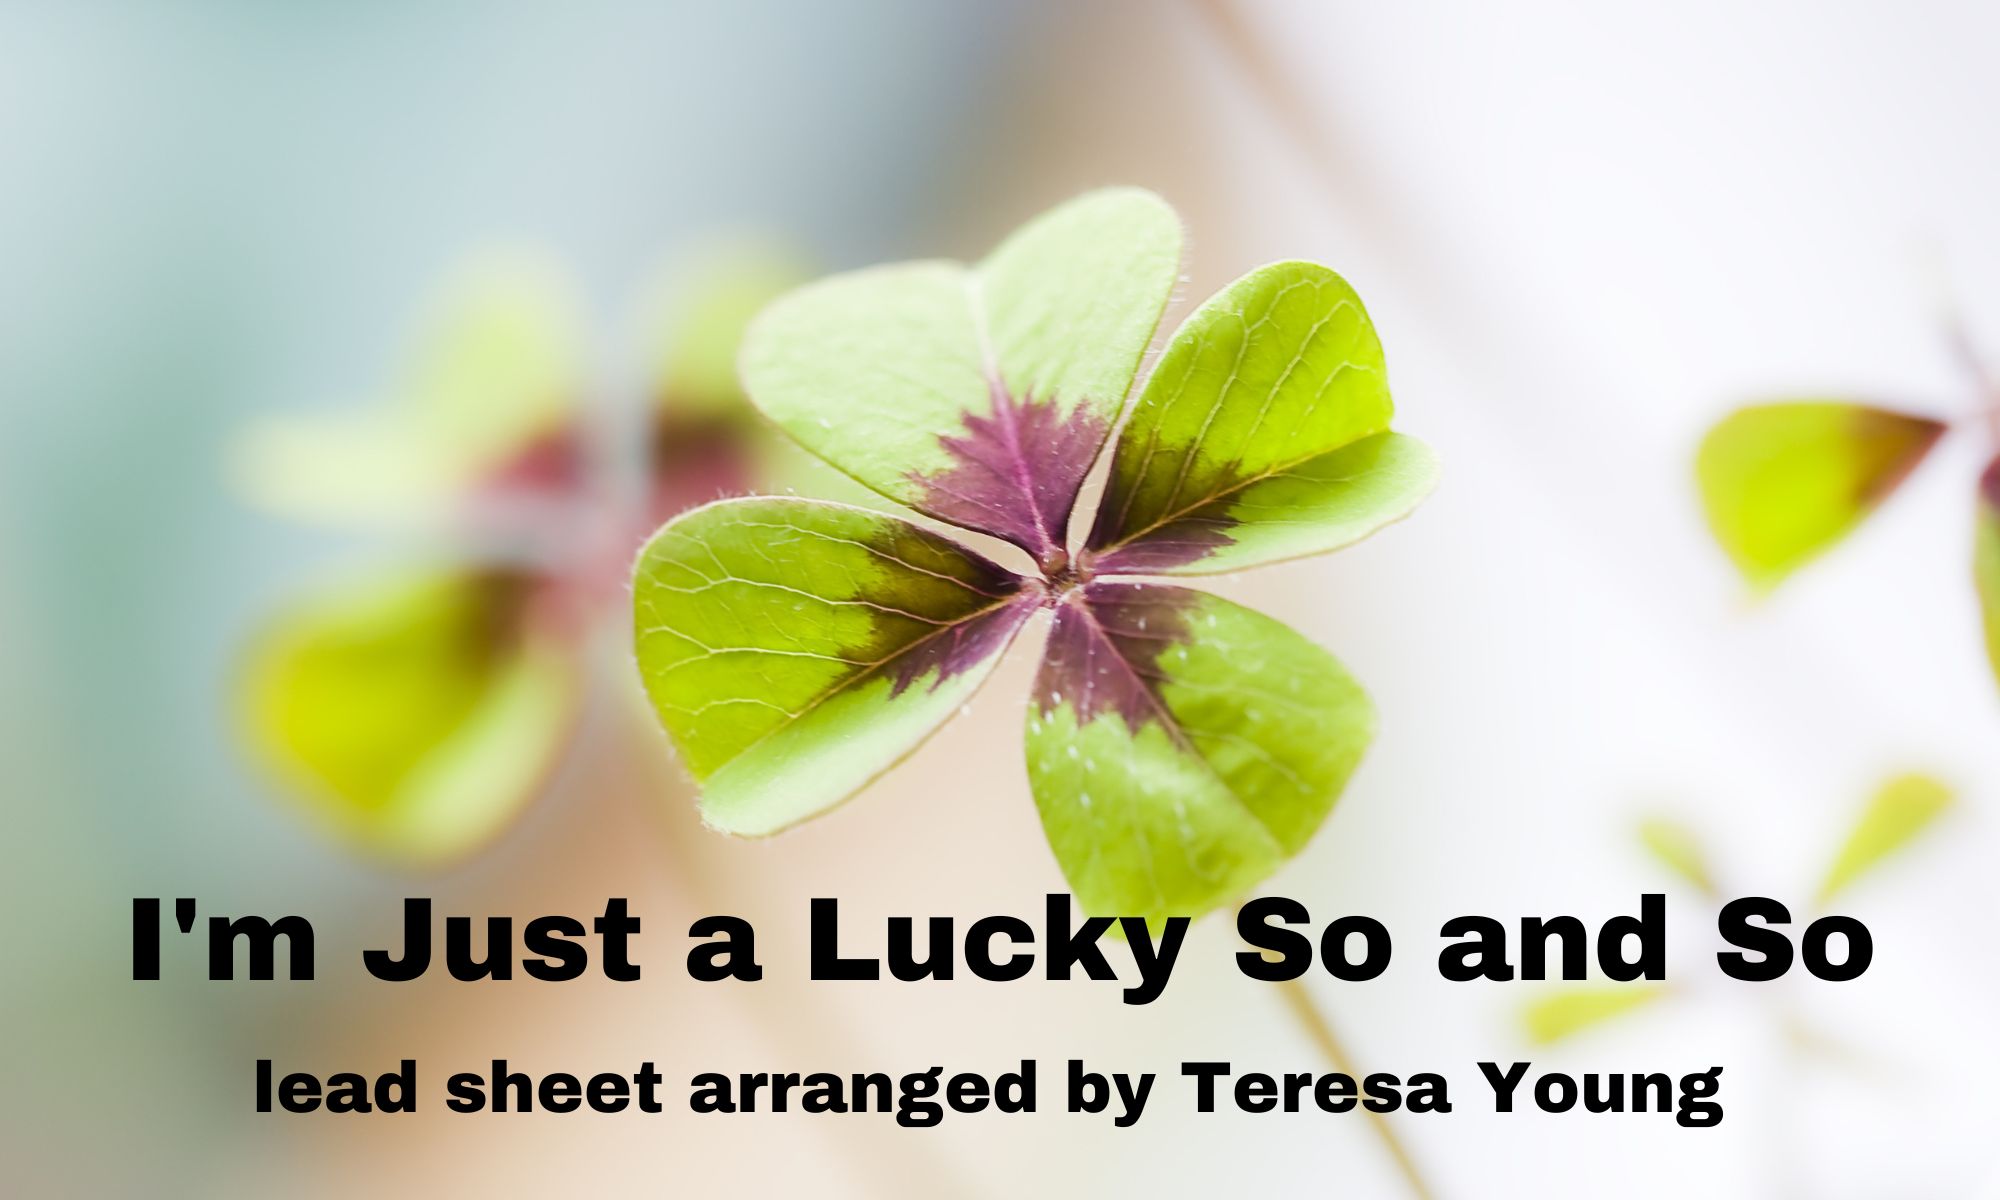 I'm Just a Lucky So and So arr. Teresa Young